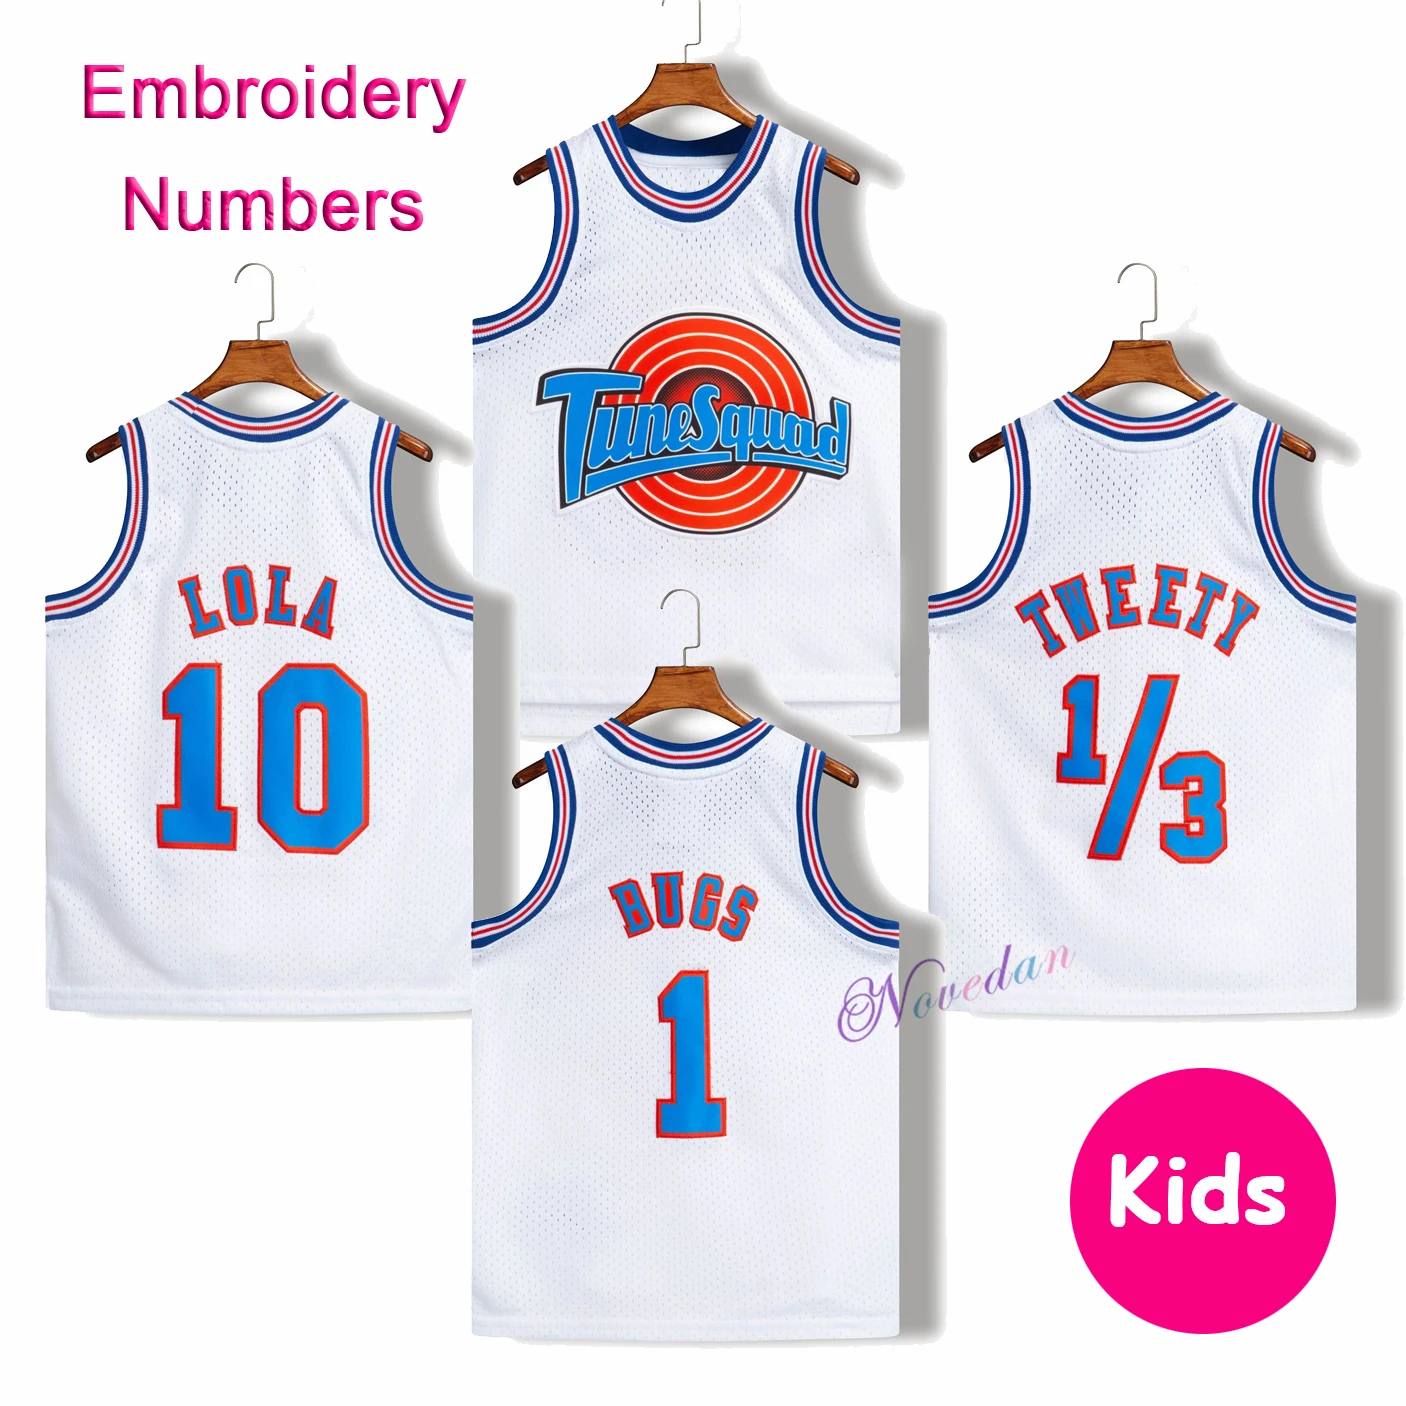 

New 2021 Space Jam Jersey Kids Tune Squad LOLA BUGS TWEETY Bunny Basketball Shirt Sports Top Cosplay Costume Embroidery Numbers